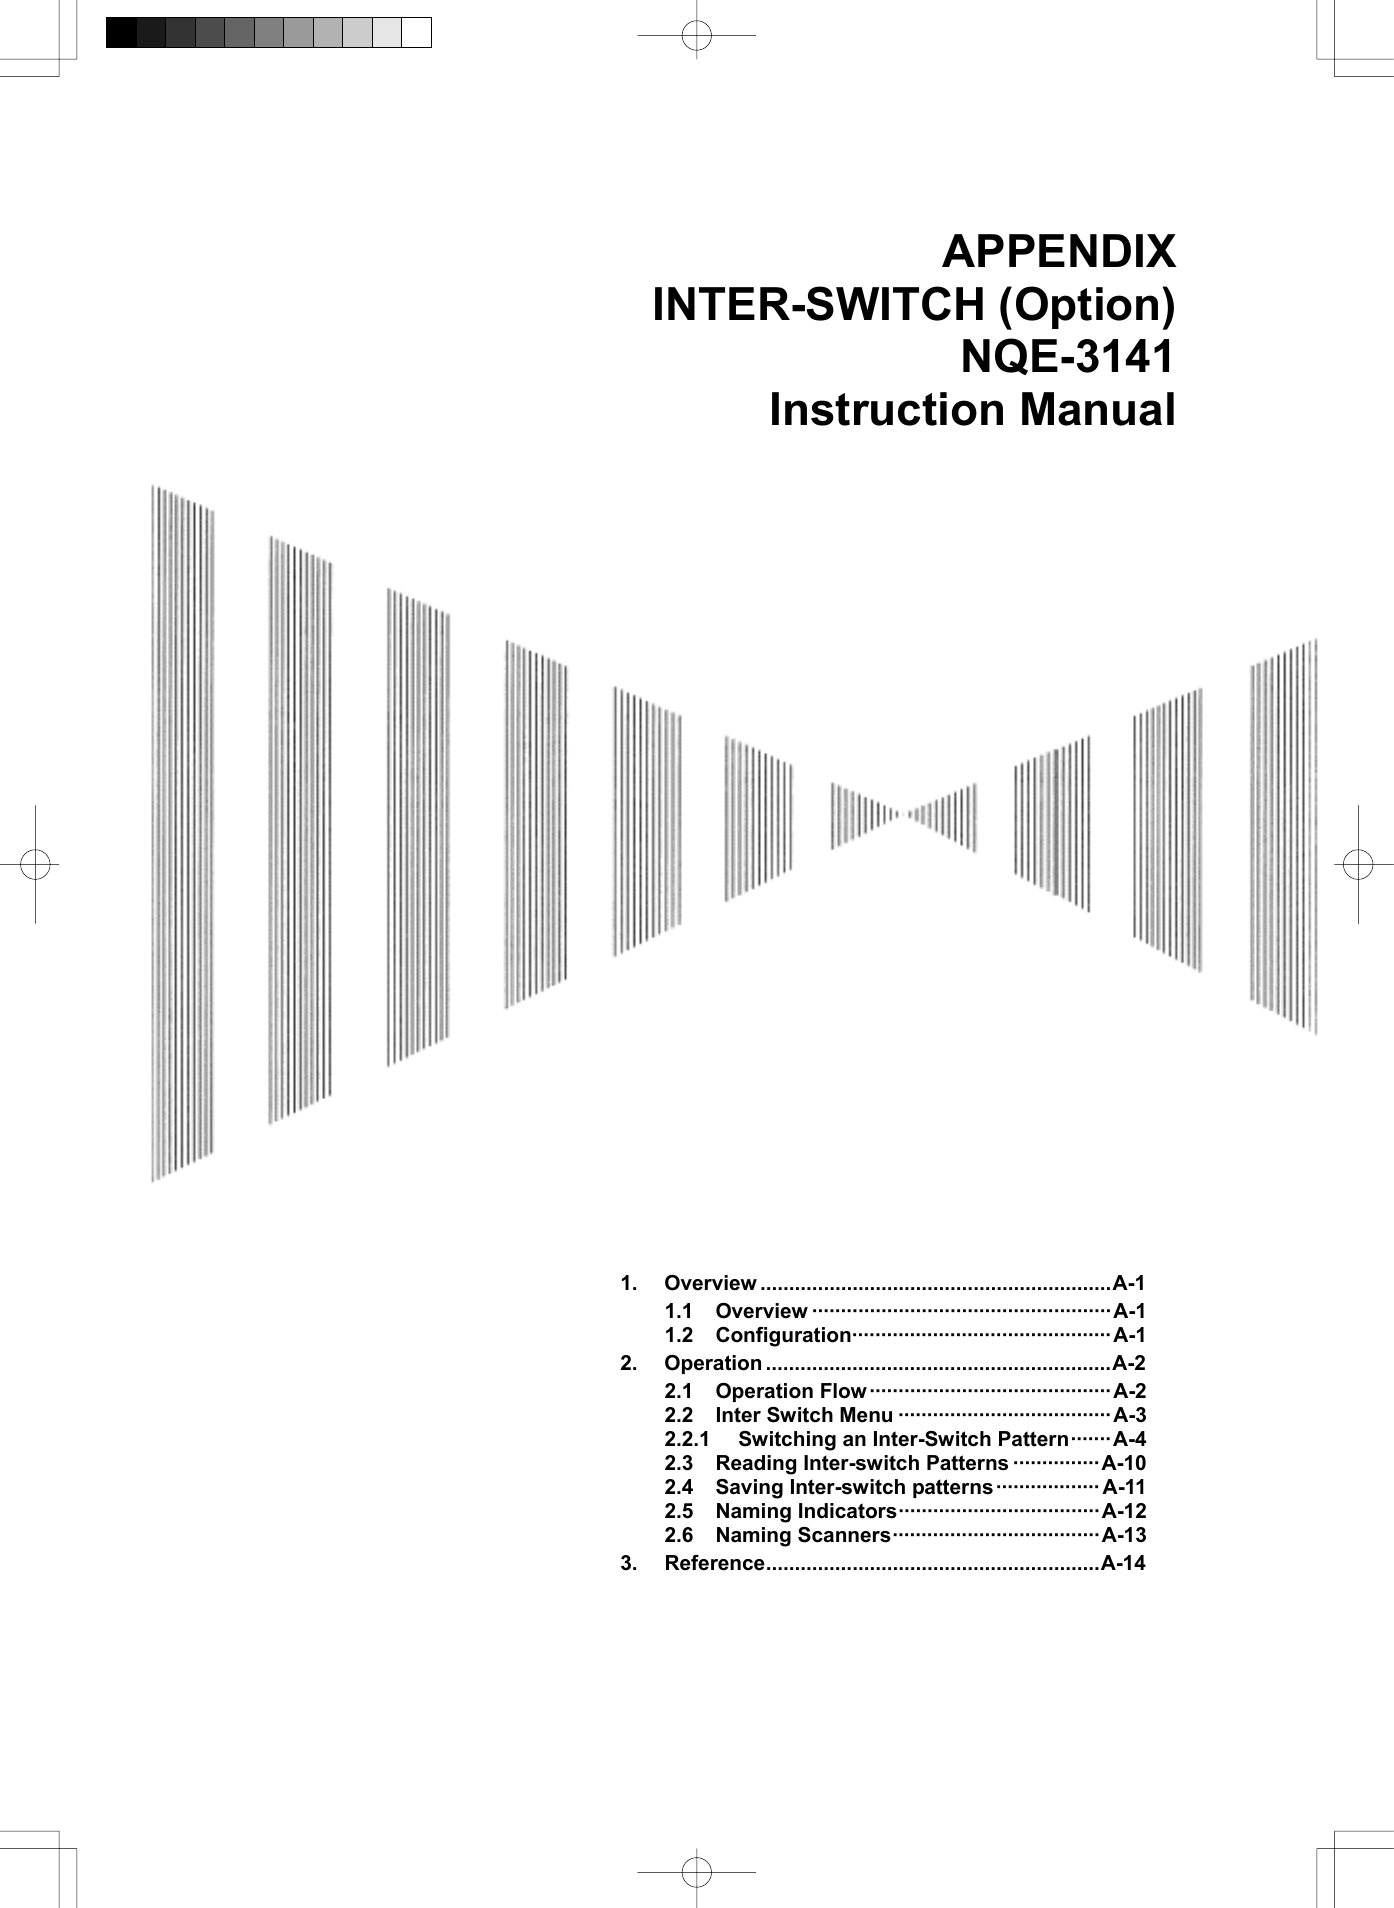  APPENDIX INTER-SWITCH (Option) NQE-3141 Instruction Manual                                   1. Overview .............................................................A-1 1.1 Overview ····················································A-1 1.2 Configuration·············································A-1 2. Operation ............................................................A-2 2.1 Operation Flow ··········································A-2 2.2 Inter Switch Menu ·····································A-3 2.2.1  Switching an Inter-Switch Pattern·······A-4 2.3 Reading Inter-switch Patterns ···············A-10 2.4 Saving Inter-switch patterns·················· A-11 2.5 Naming Indicators···································A-12 2.6 Naming Scanners····································A-13 3. Reference..........................................................A-14  